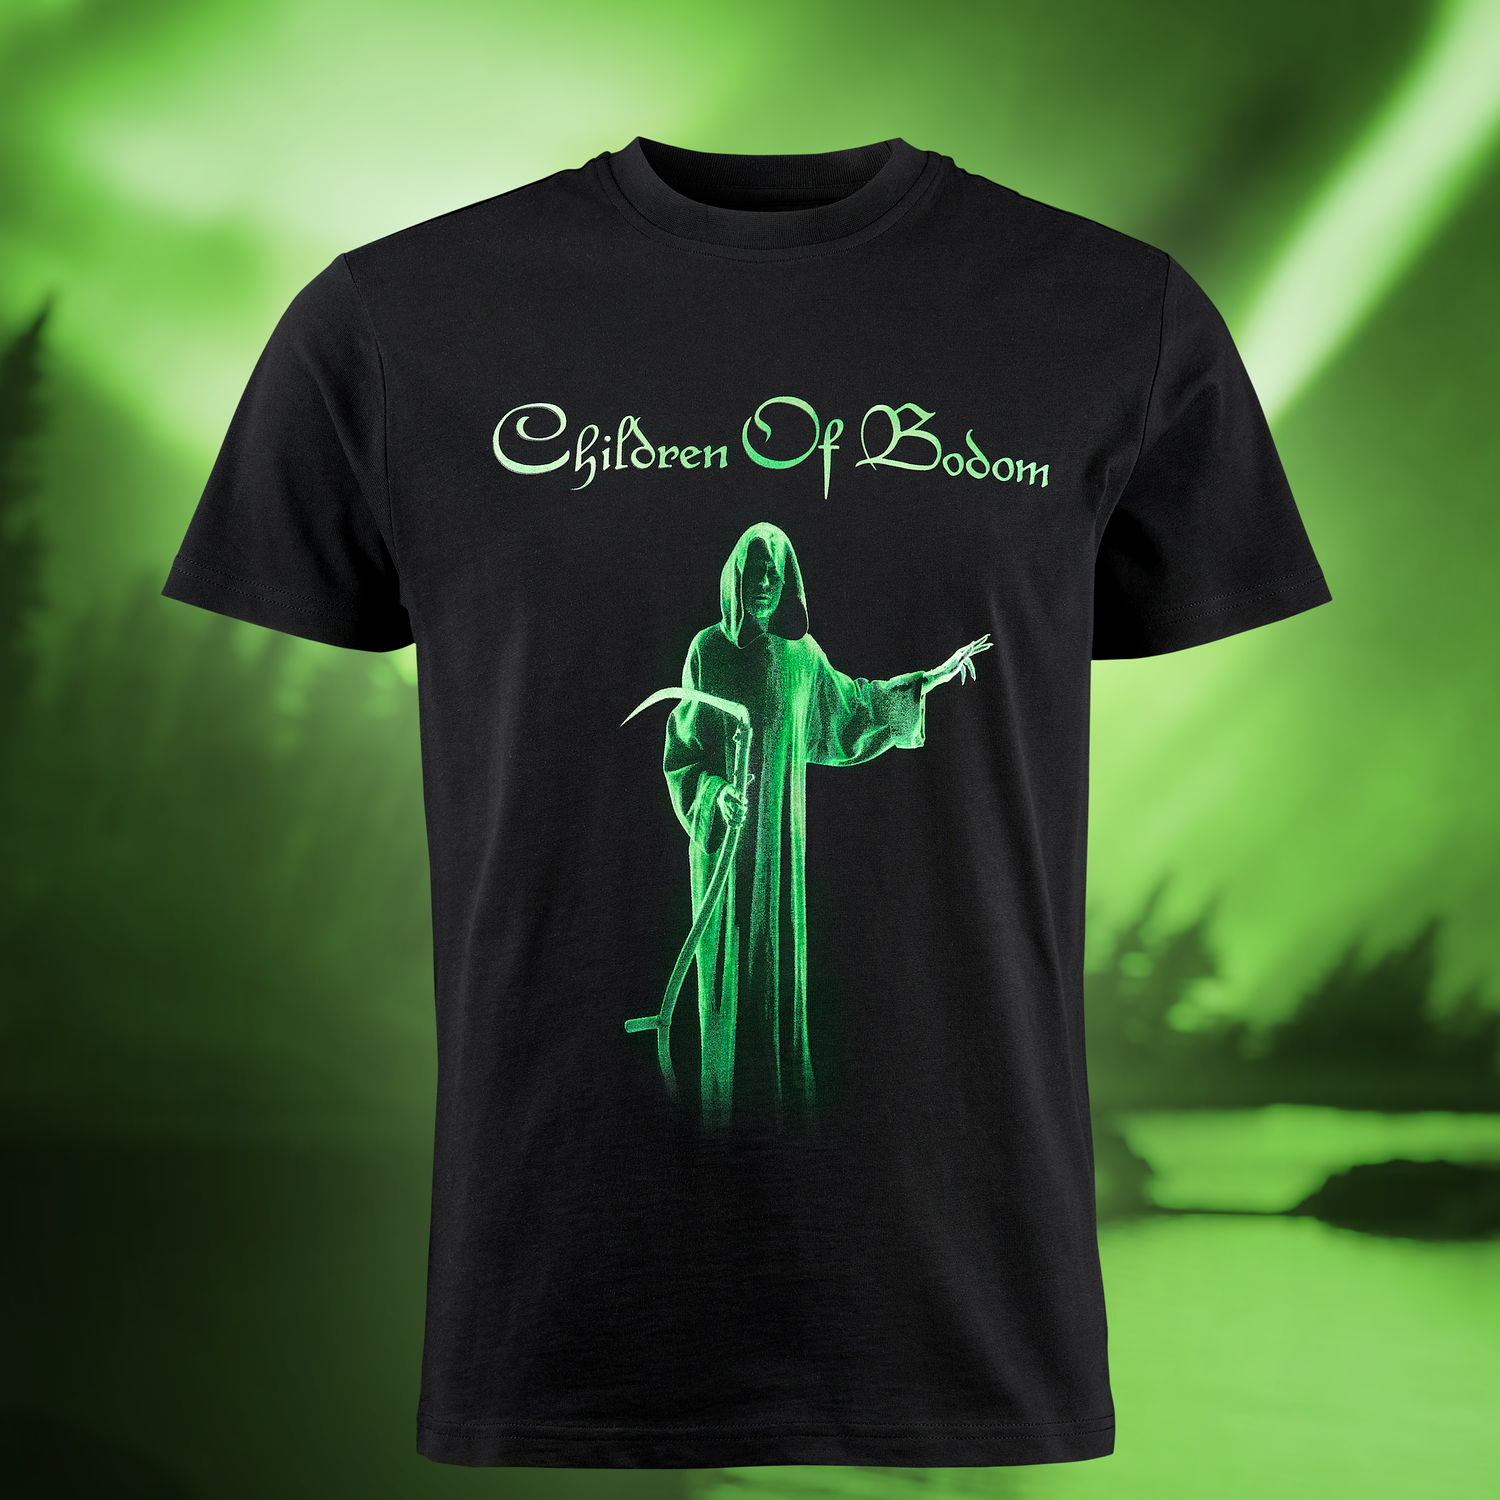 actually Hinder according to The Hatebreeder Album T-shirt — Children Of Bodom - Official Website